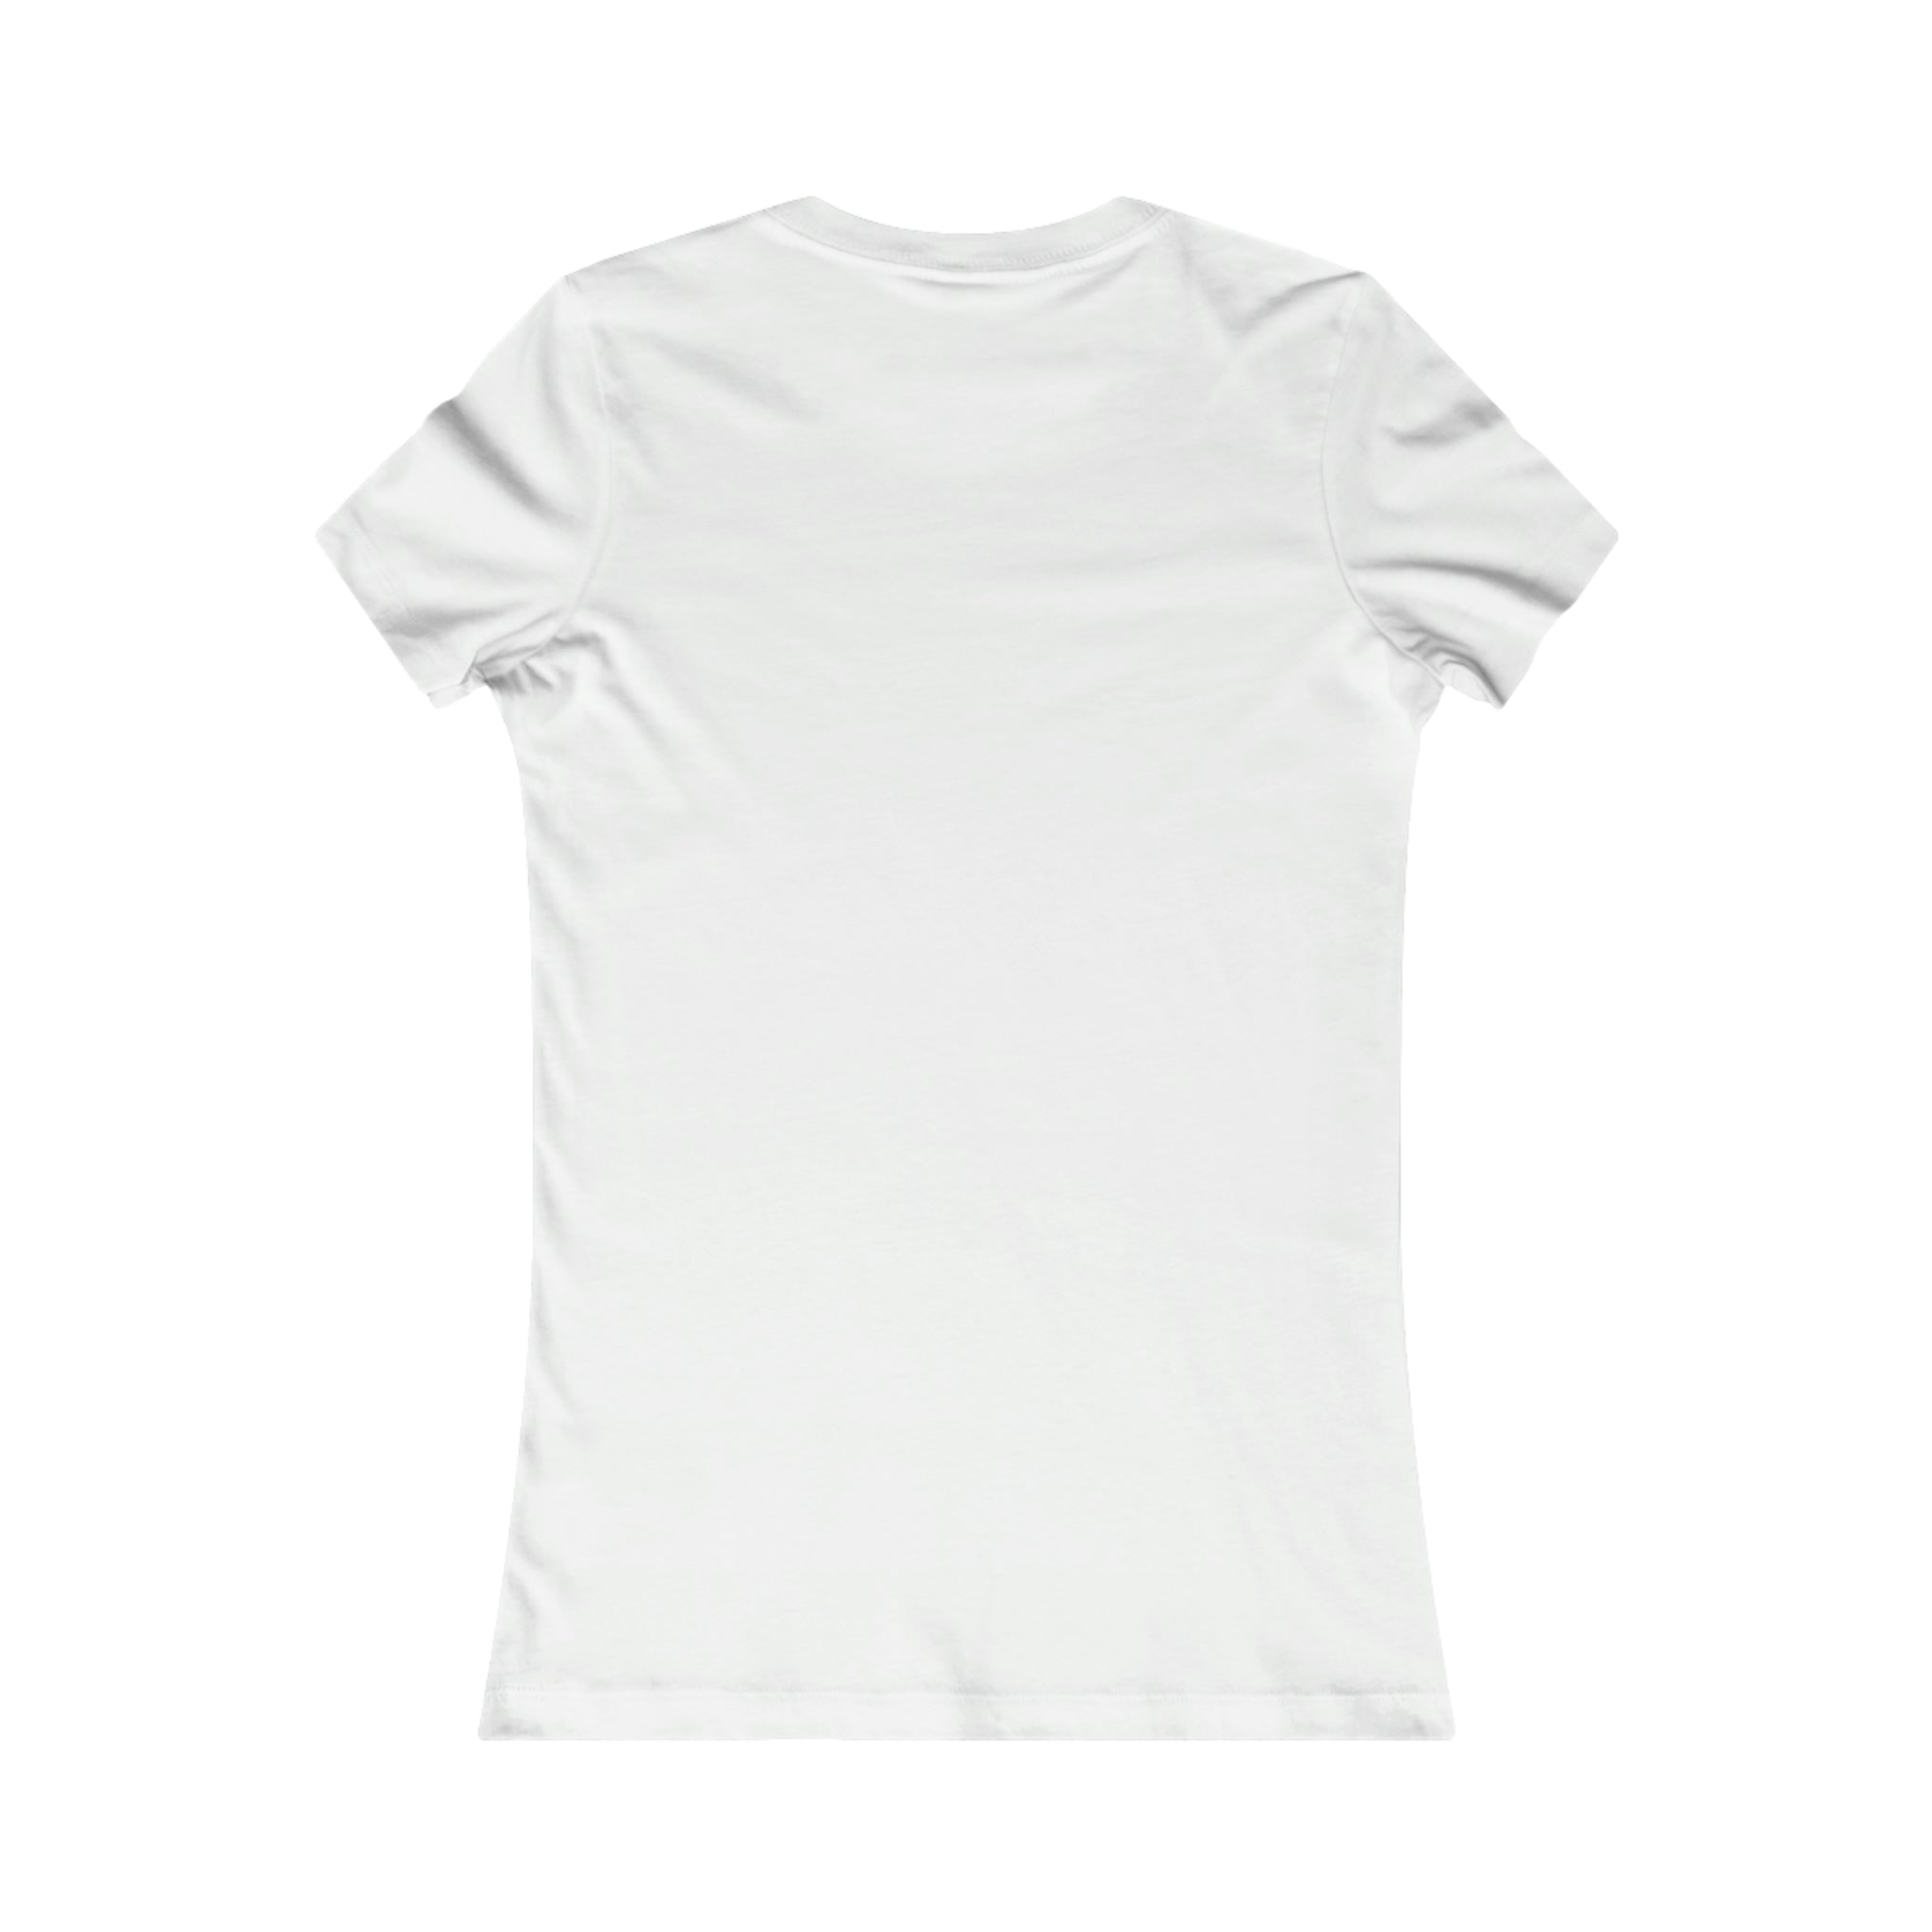 Kitty #84447 (Women's) Adult Fitted T-Shirt